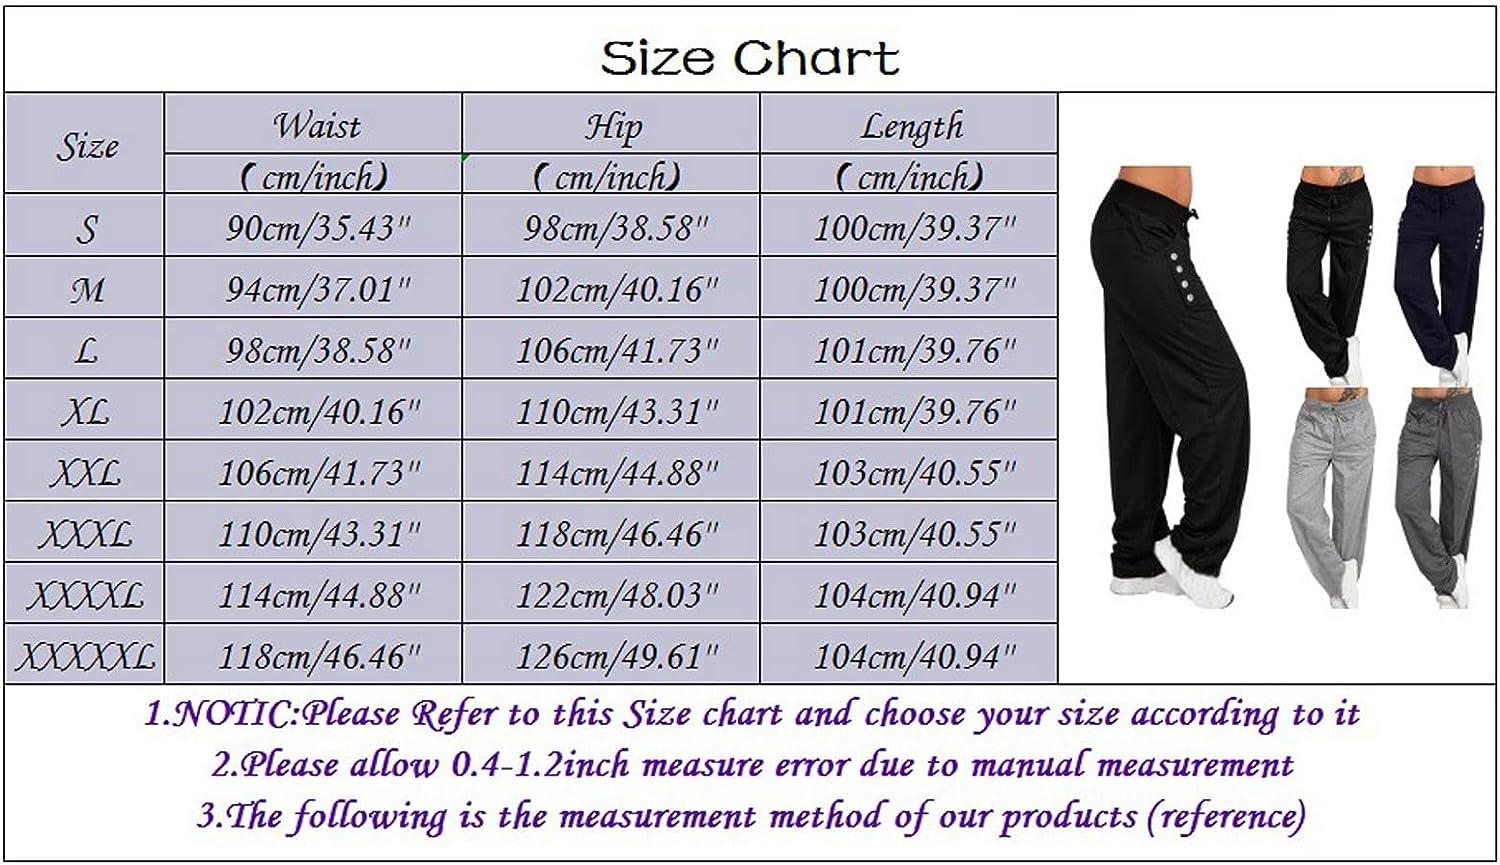 Handyulong Yoga Pants Women's Stretch Workout Relax Fit Super Soft